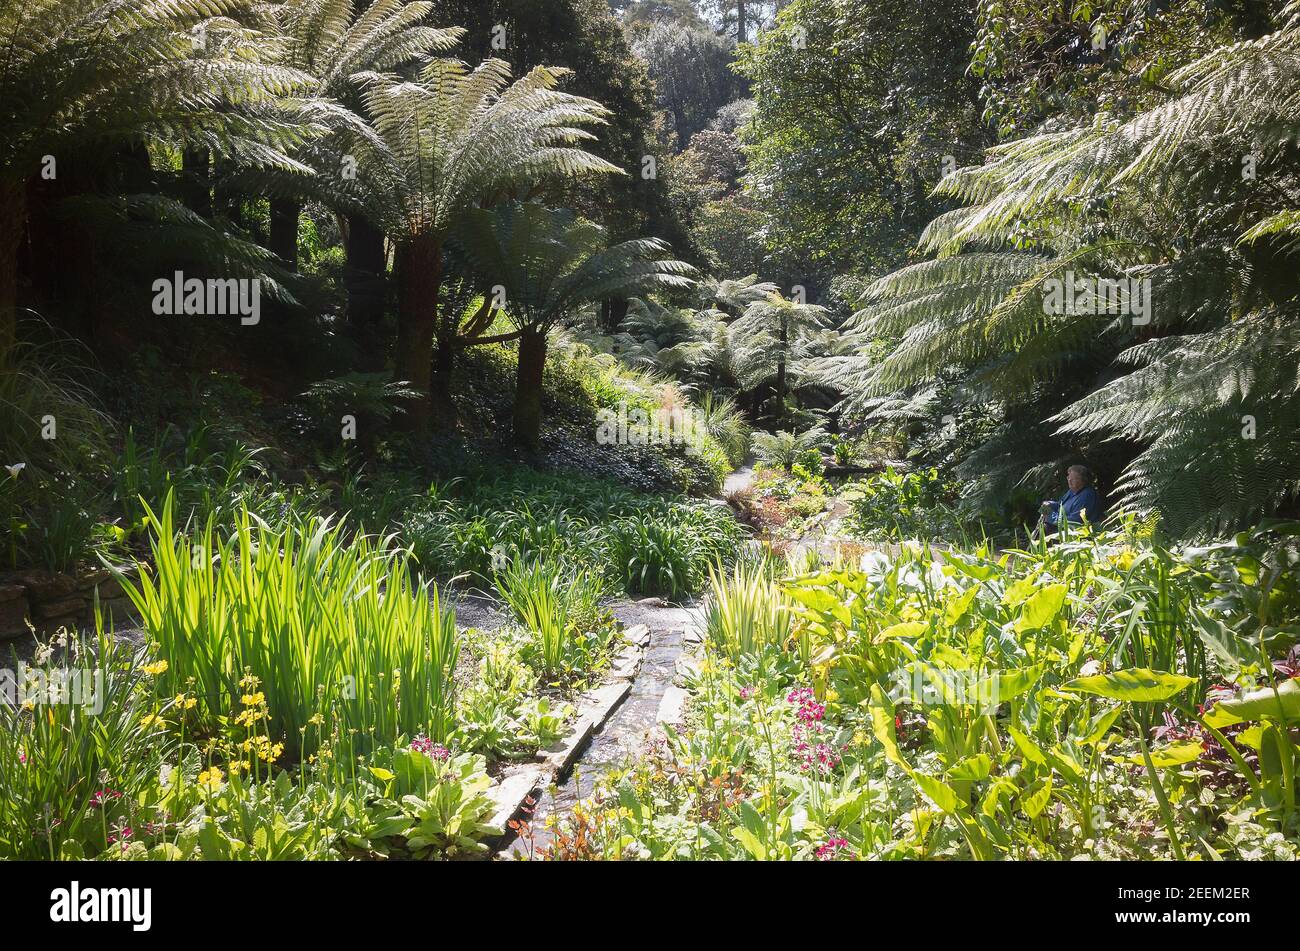 An idyllic scene in the Water Garden at Trebah in Cornwall England UK featuring tree ferns and othe sub-tropical plants Stock Photo